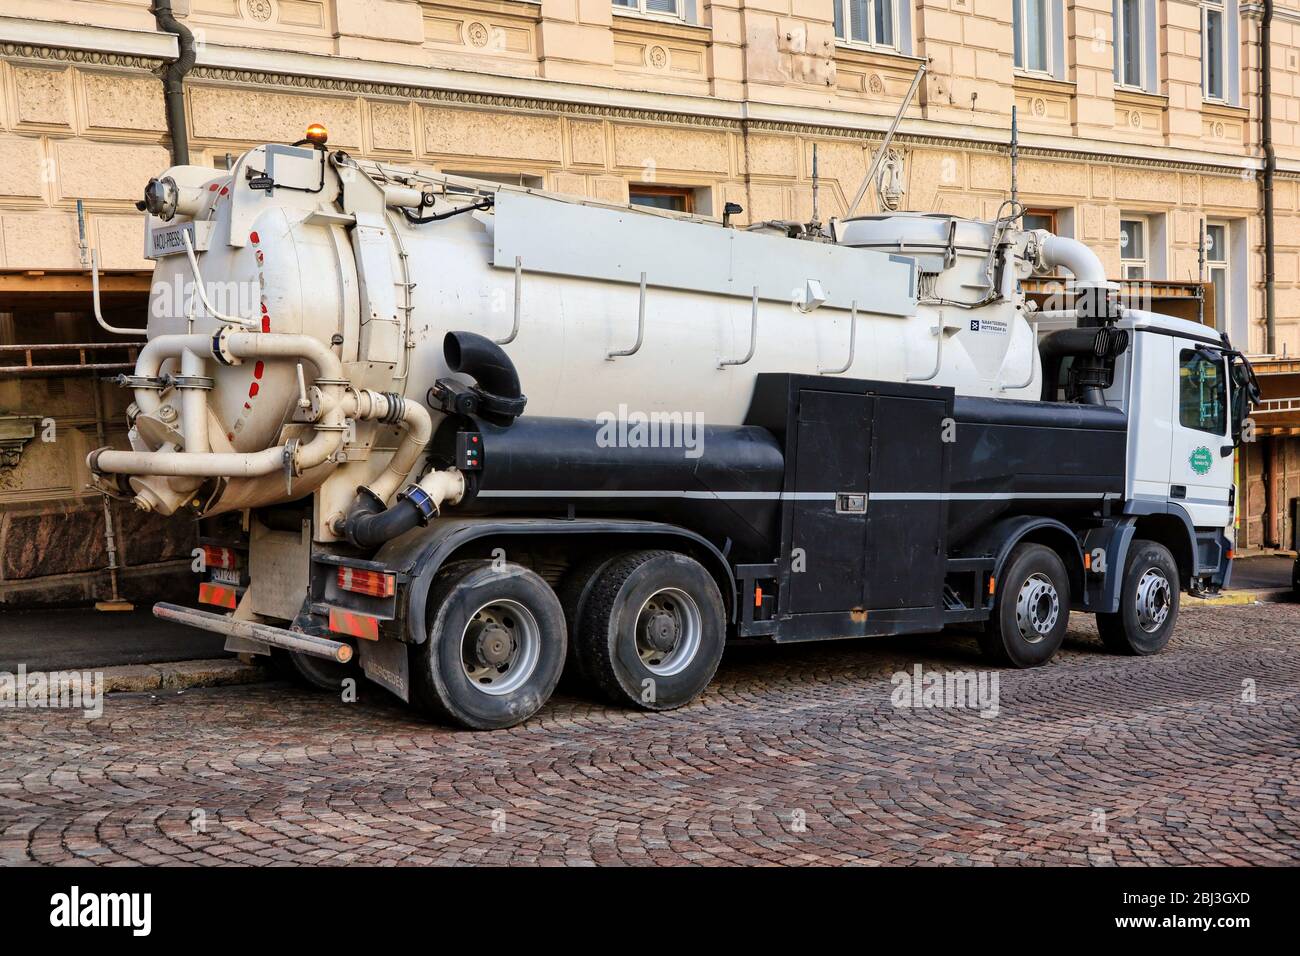 White Vacu-Press 8000 truck by city work site. Vacu-press is suitable for suction and blowing of dry and wet material. Helsinki, Finland. Apr 28, 20. Stock Photo